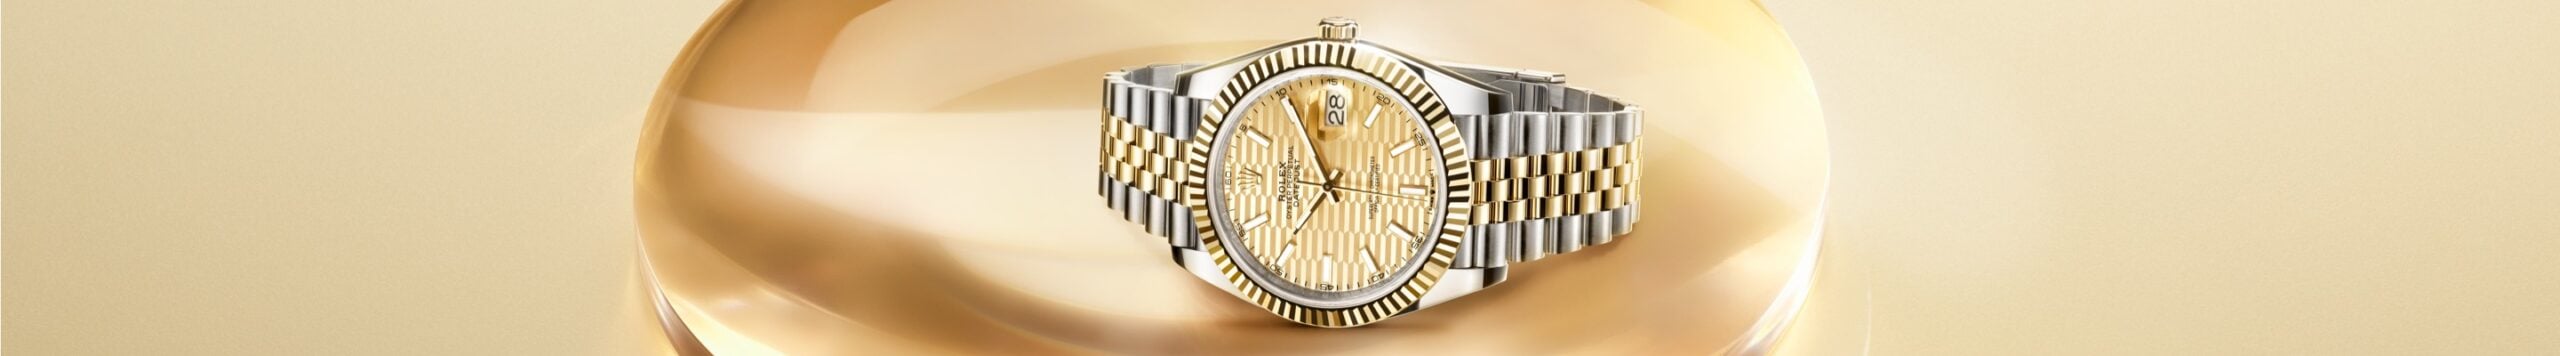 DATEJUST: MAKE A DATE OF A DAY